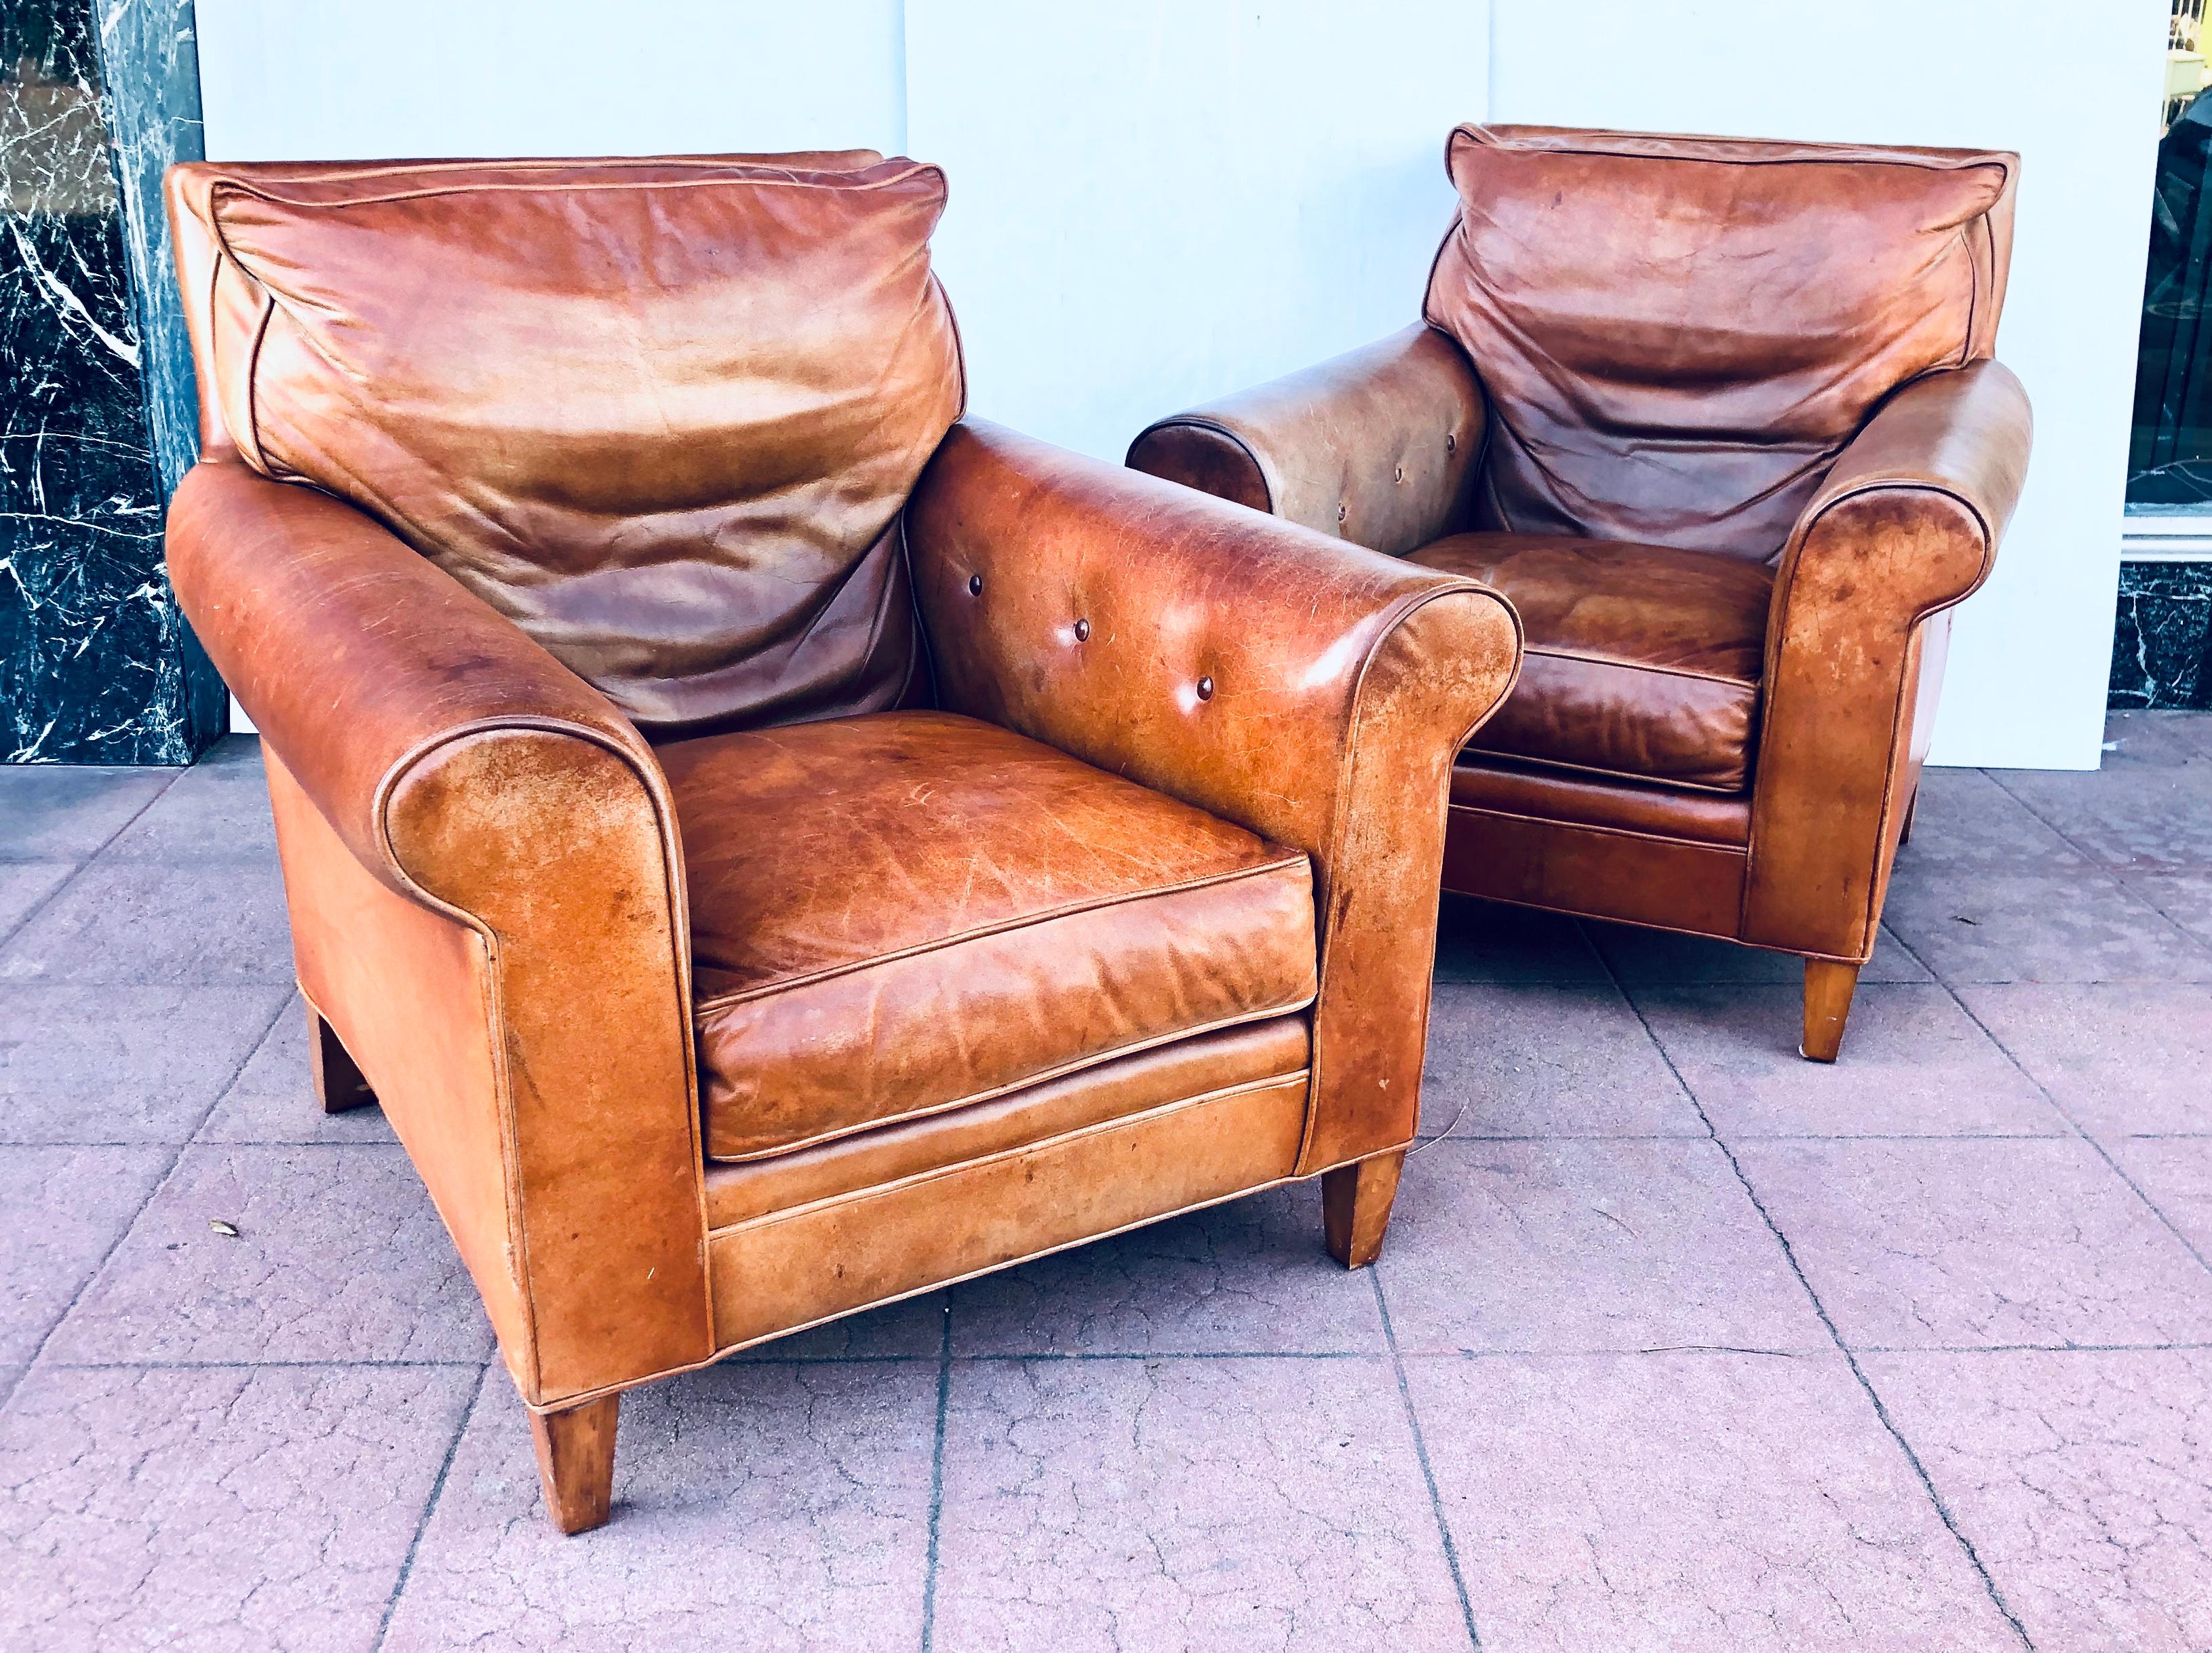 A classic pair of distressed leather club chairs by renowned furniture maker Ralph Lauren. Great traditional look! With solid wood legs . Sold As/Is please note one of the chairs has 3 side scratches as shown. Nicely worn leather. Very comfy.